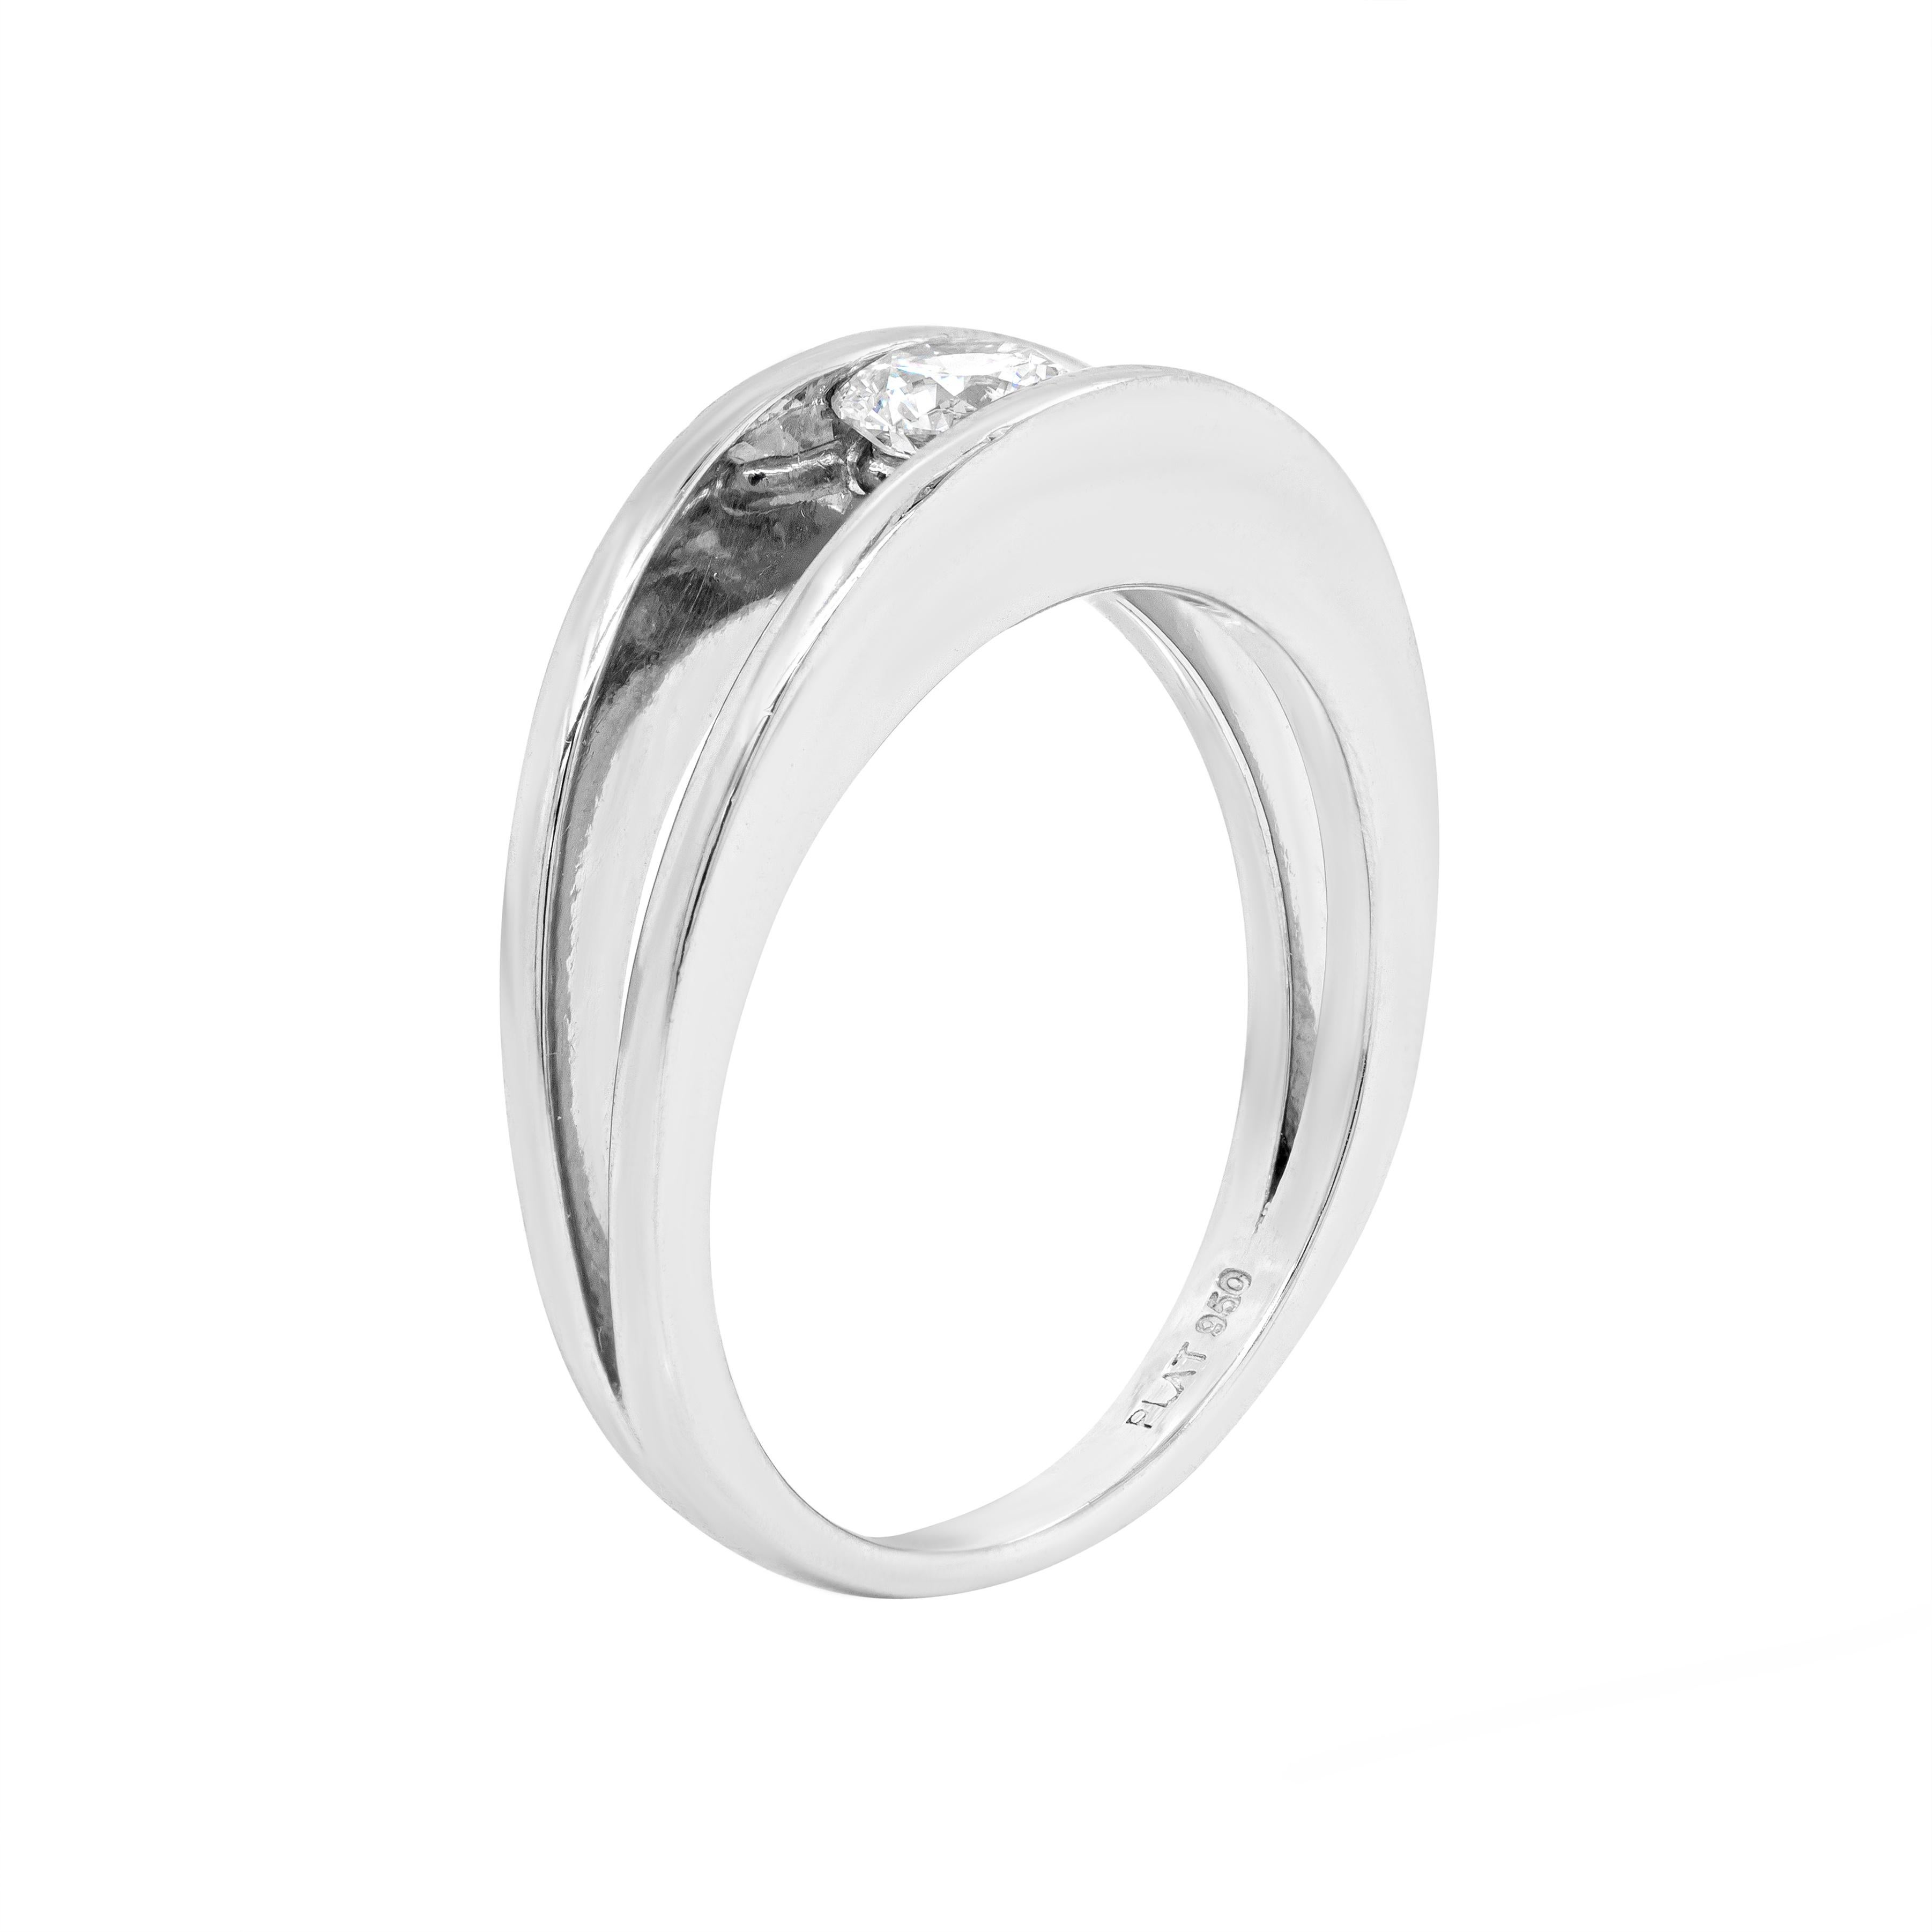 Minimalist, yet exquisitely designed, this platinum engagement ring features a beautiful 0.35ct round brilliant cut diamond, certified F in colour and SI2 in clarity, tension set into a split platinum band. Stamped SHIMANSKY, PLAT 950. UK finger